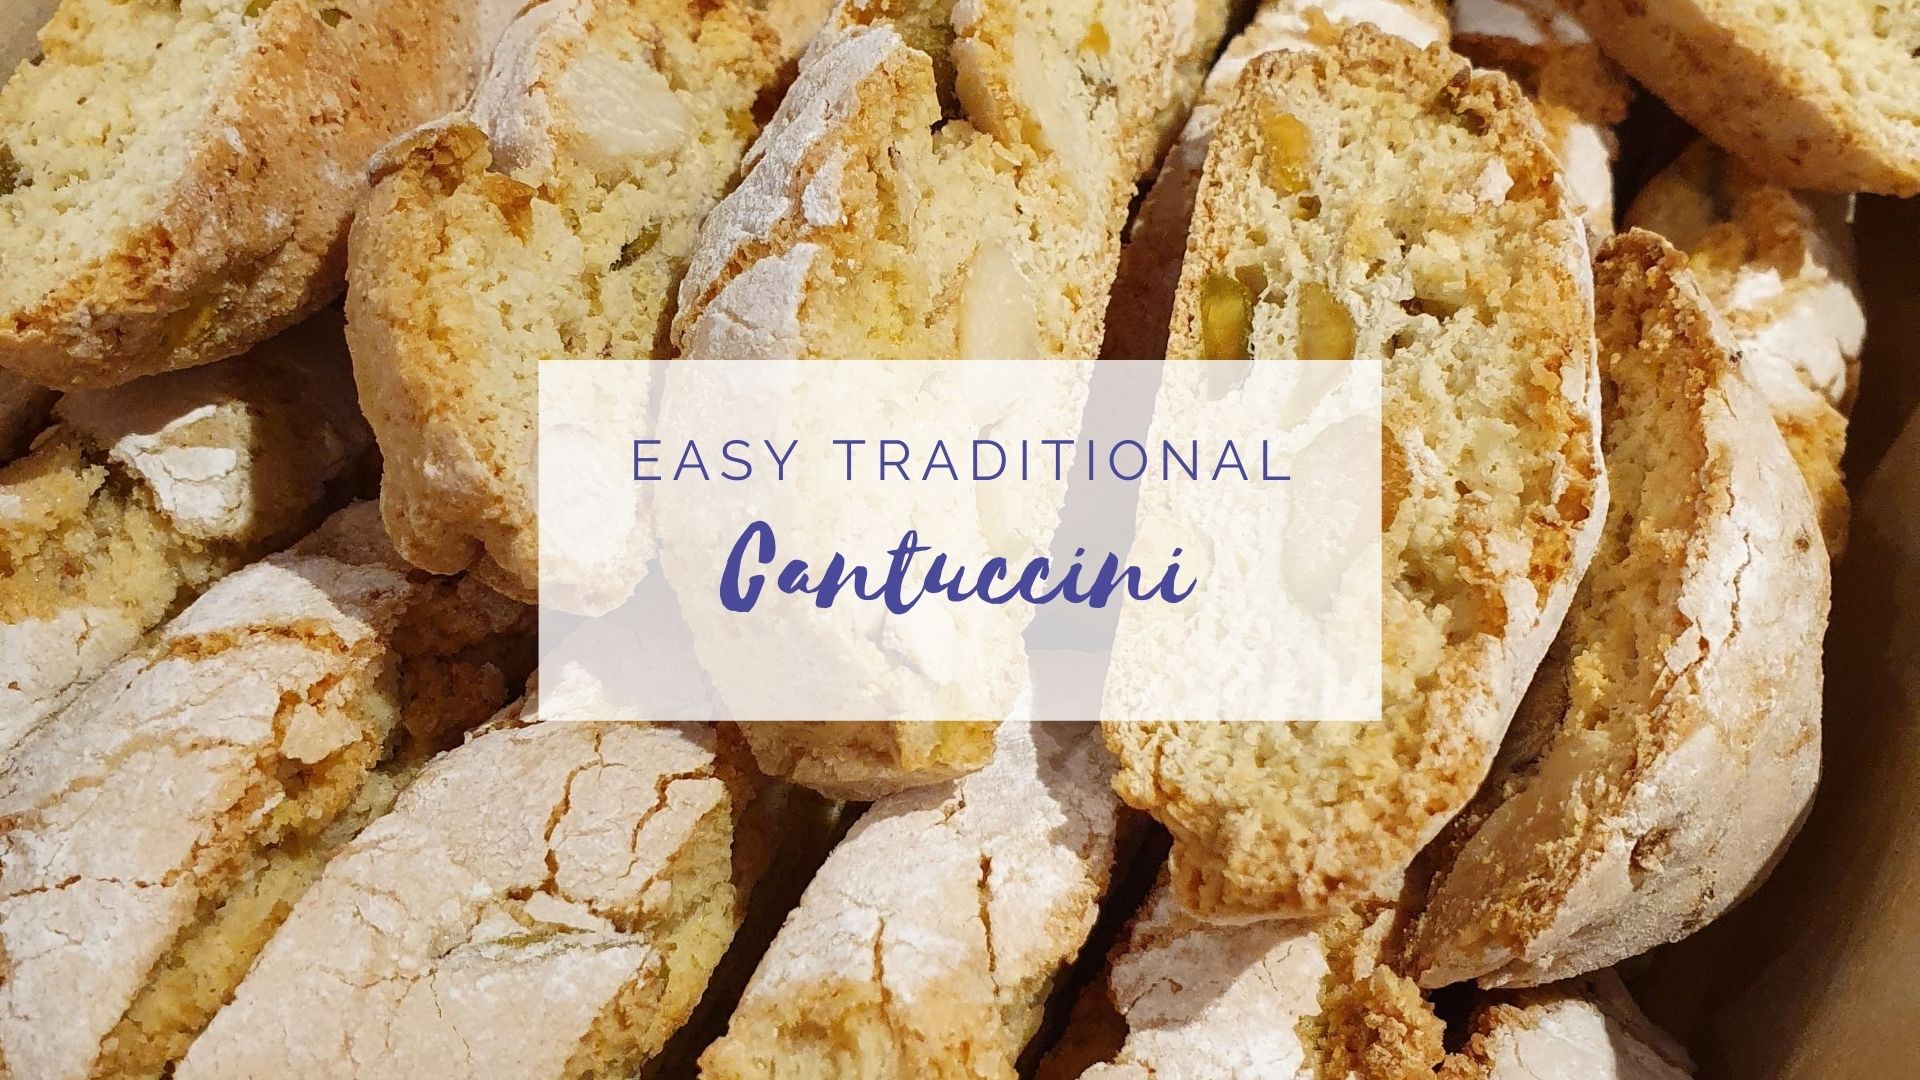 Easy Traditional Cantuccini Recipe